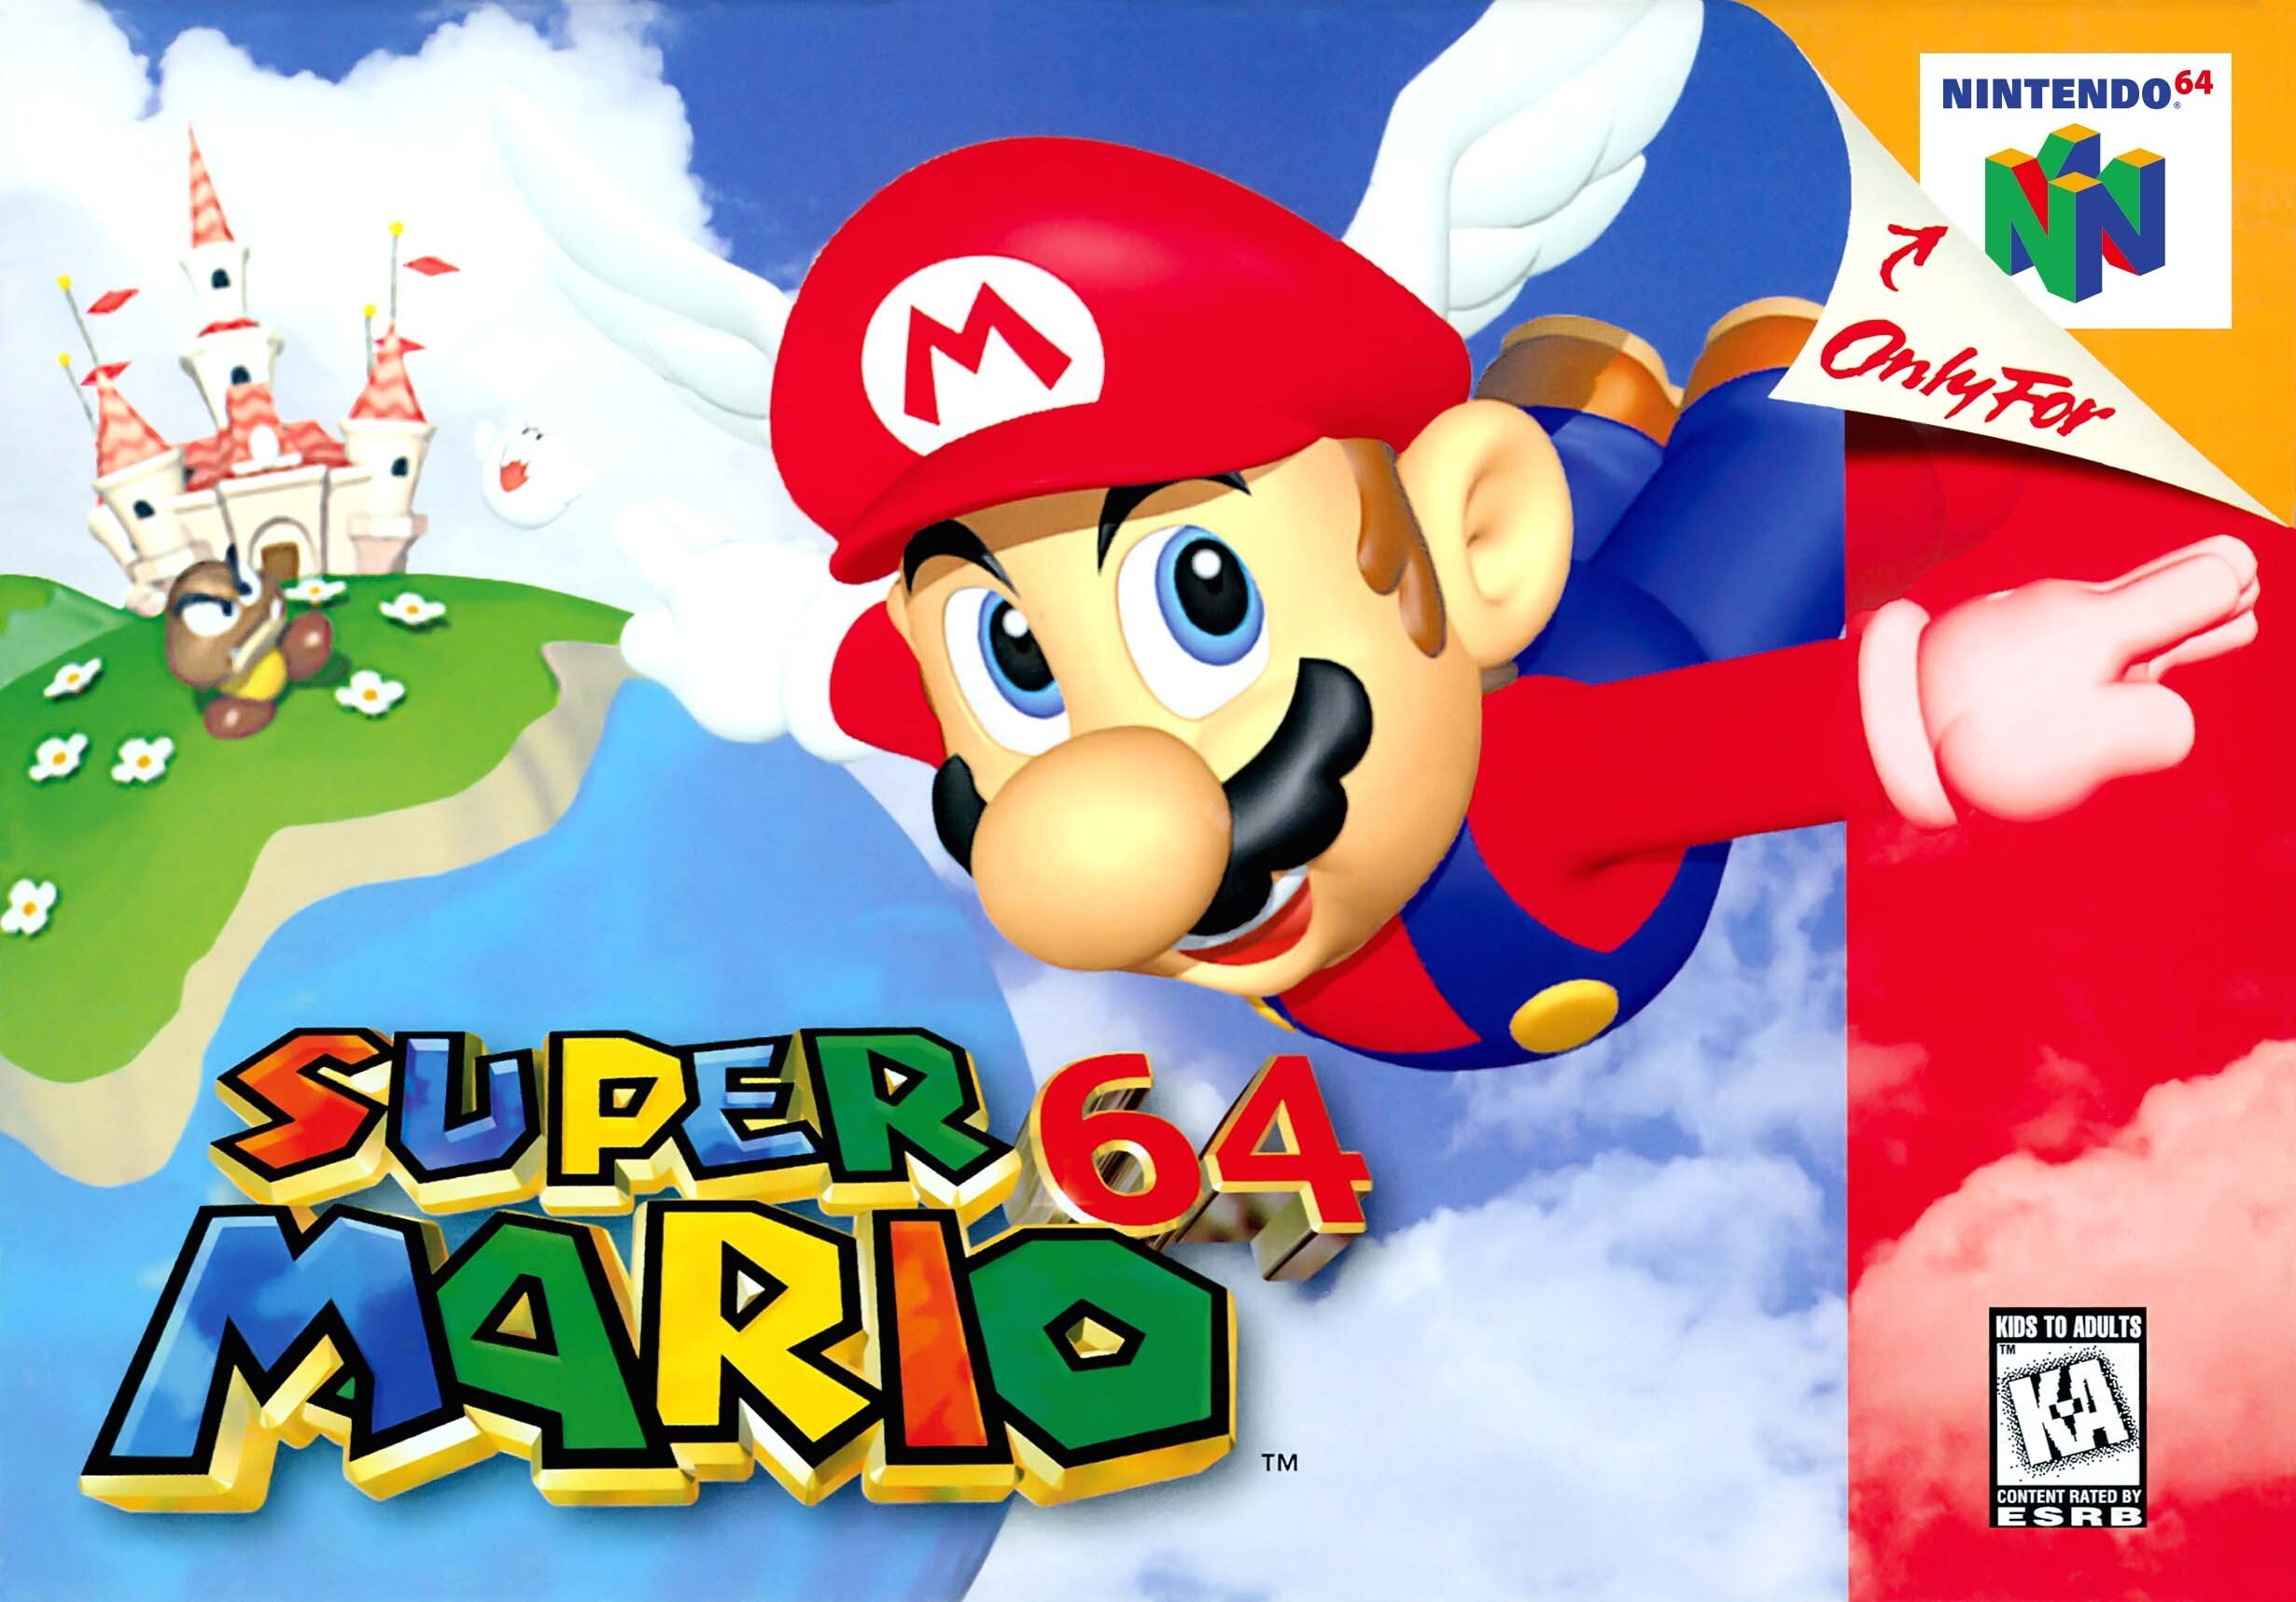 More information about "Official N64 Box Art By Nintendo For N64 Online App1.0.0"